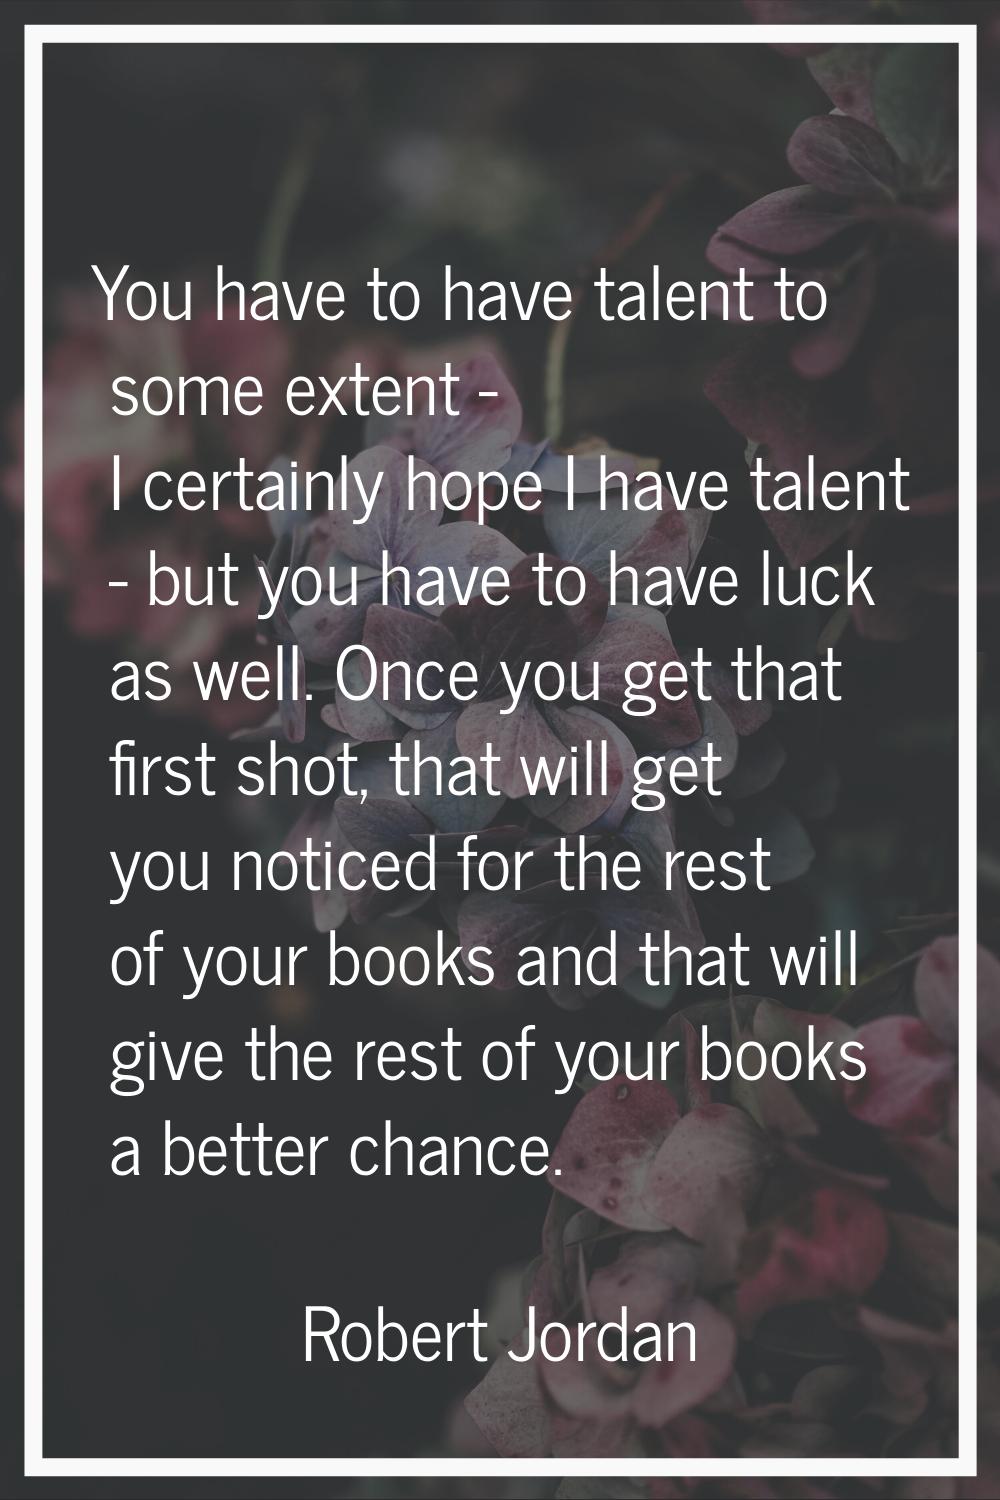 You have to have talent to some extent - I certainly hope I have talent - but you have to have luck